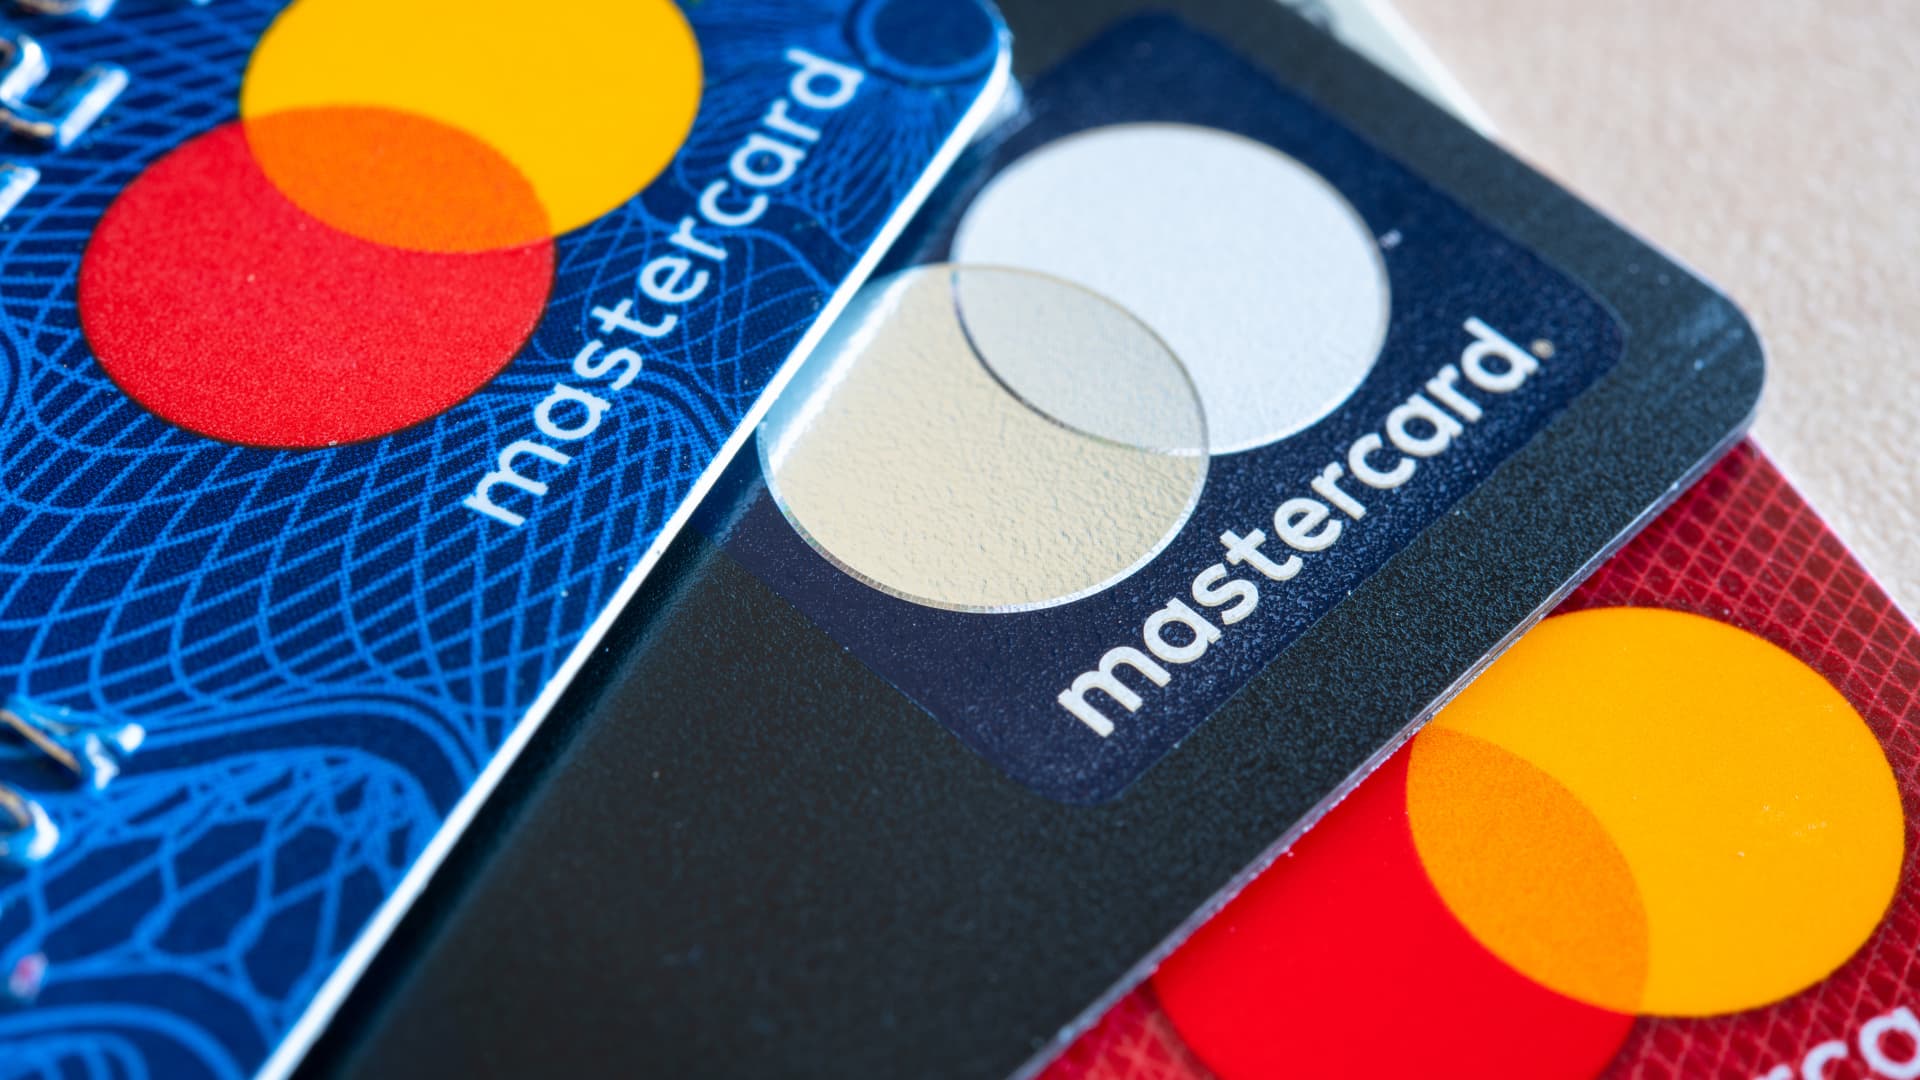 Mastercard to phase out card entry for e-commerce by 2030 in Europe